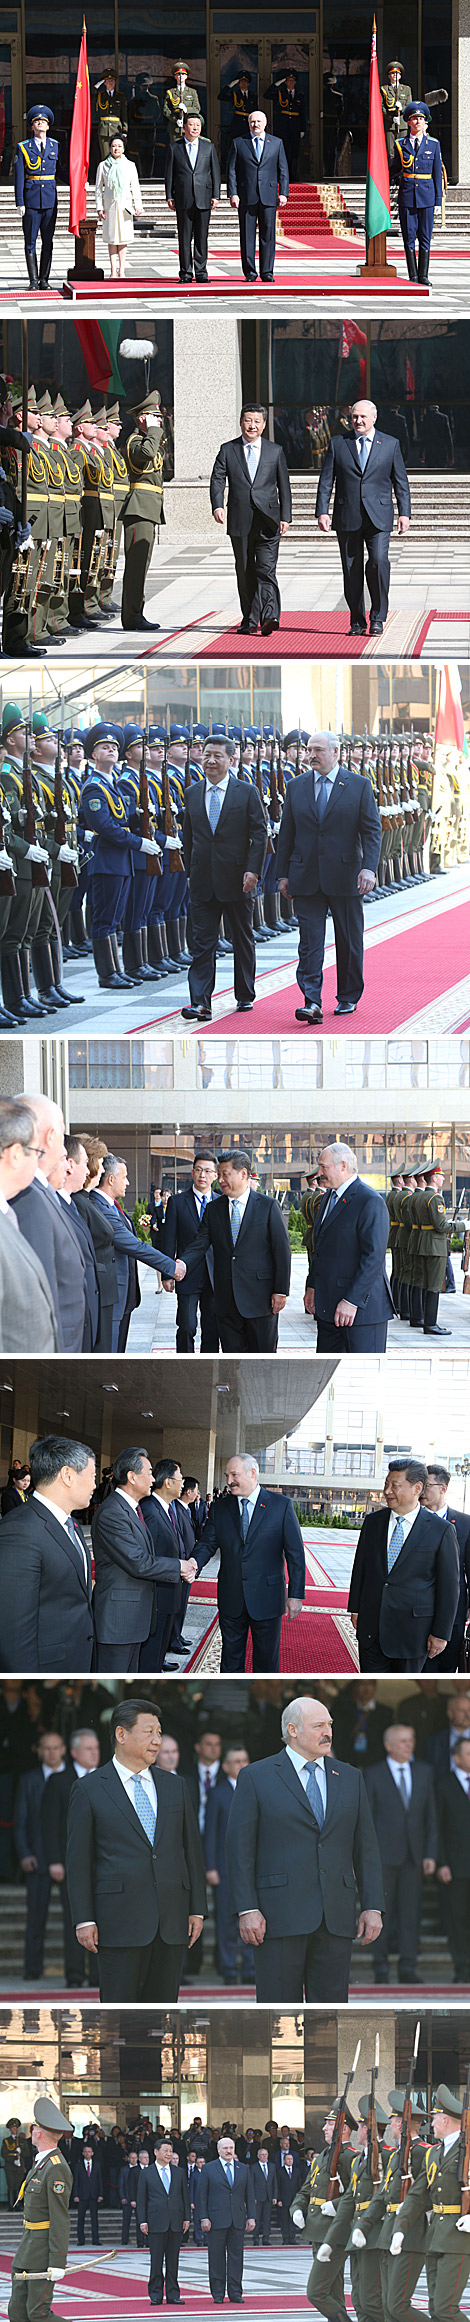 Official welcome ceremony in honor of Chinese President Xi Jinping in Minsk 